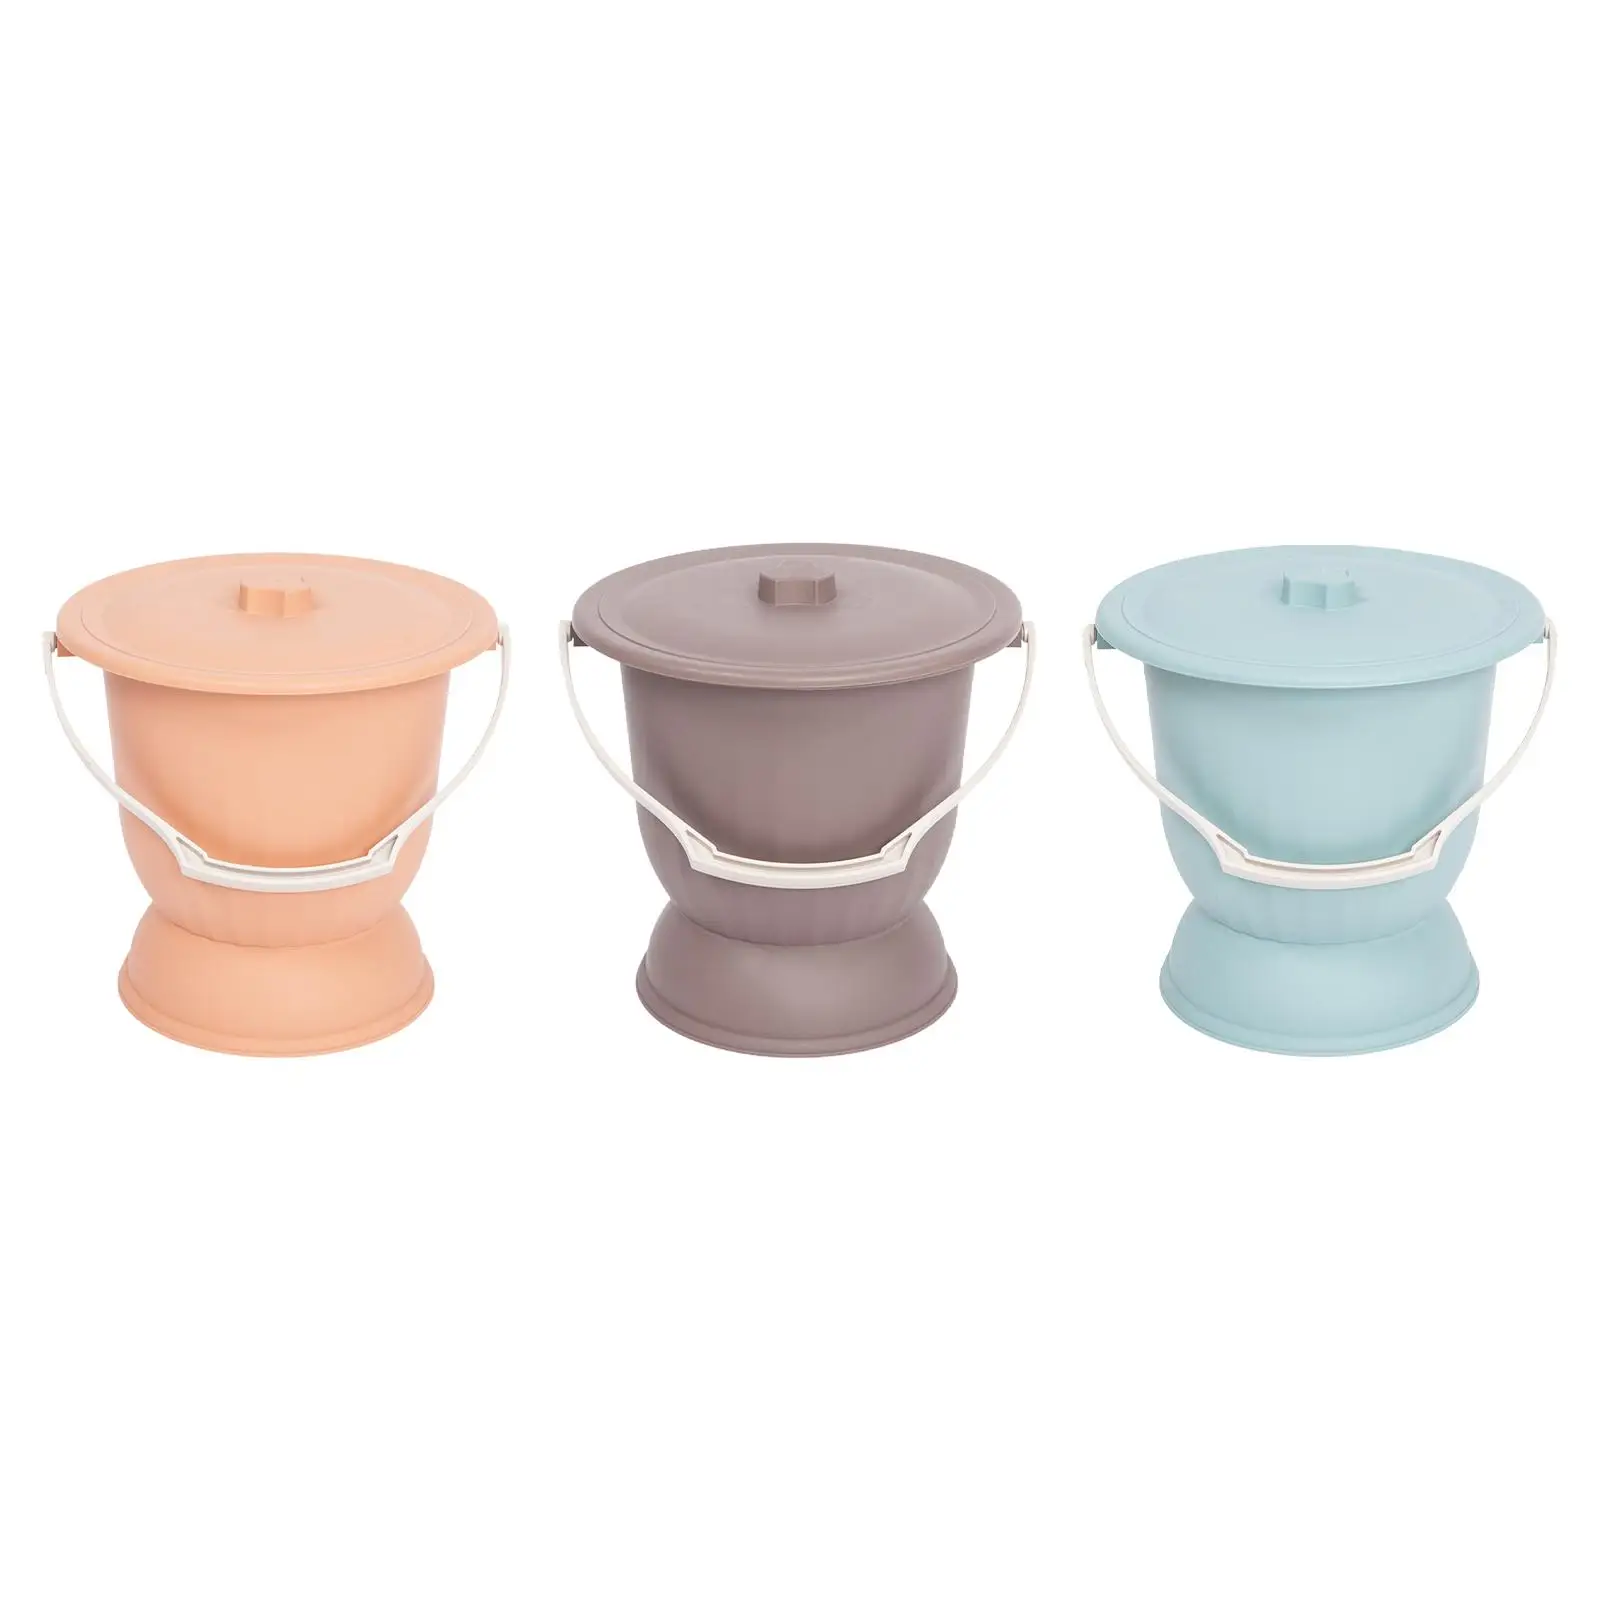 Household Spittoon with Lid Thickened Potty Bedpan Chamber Pot for elder Adults Children Woman